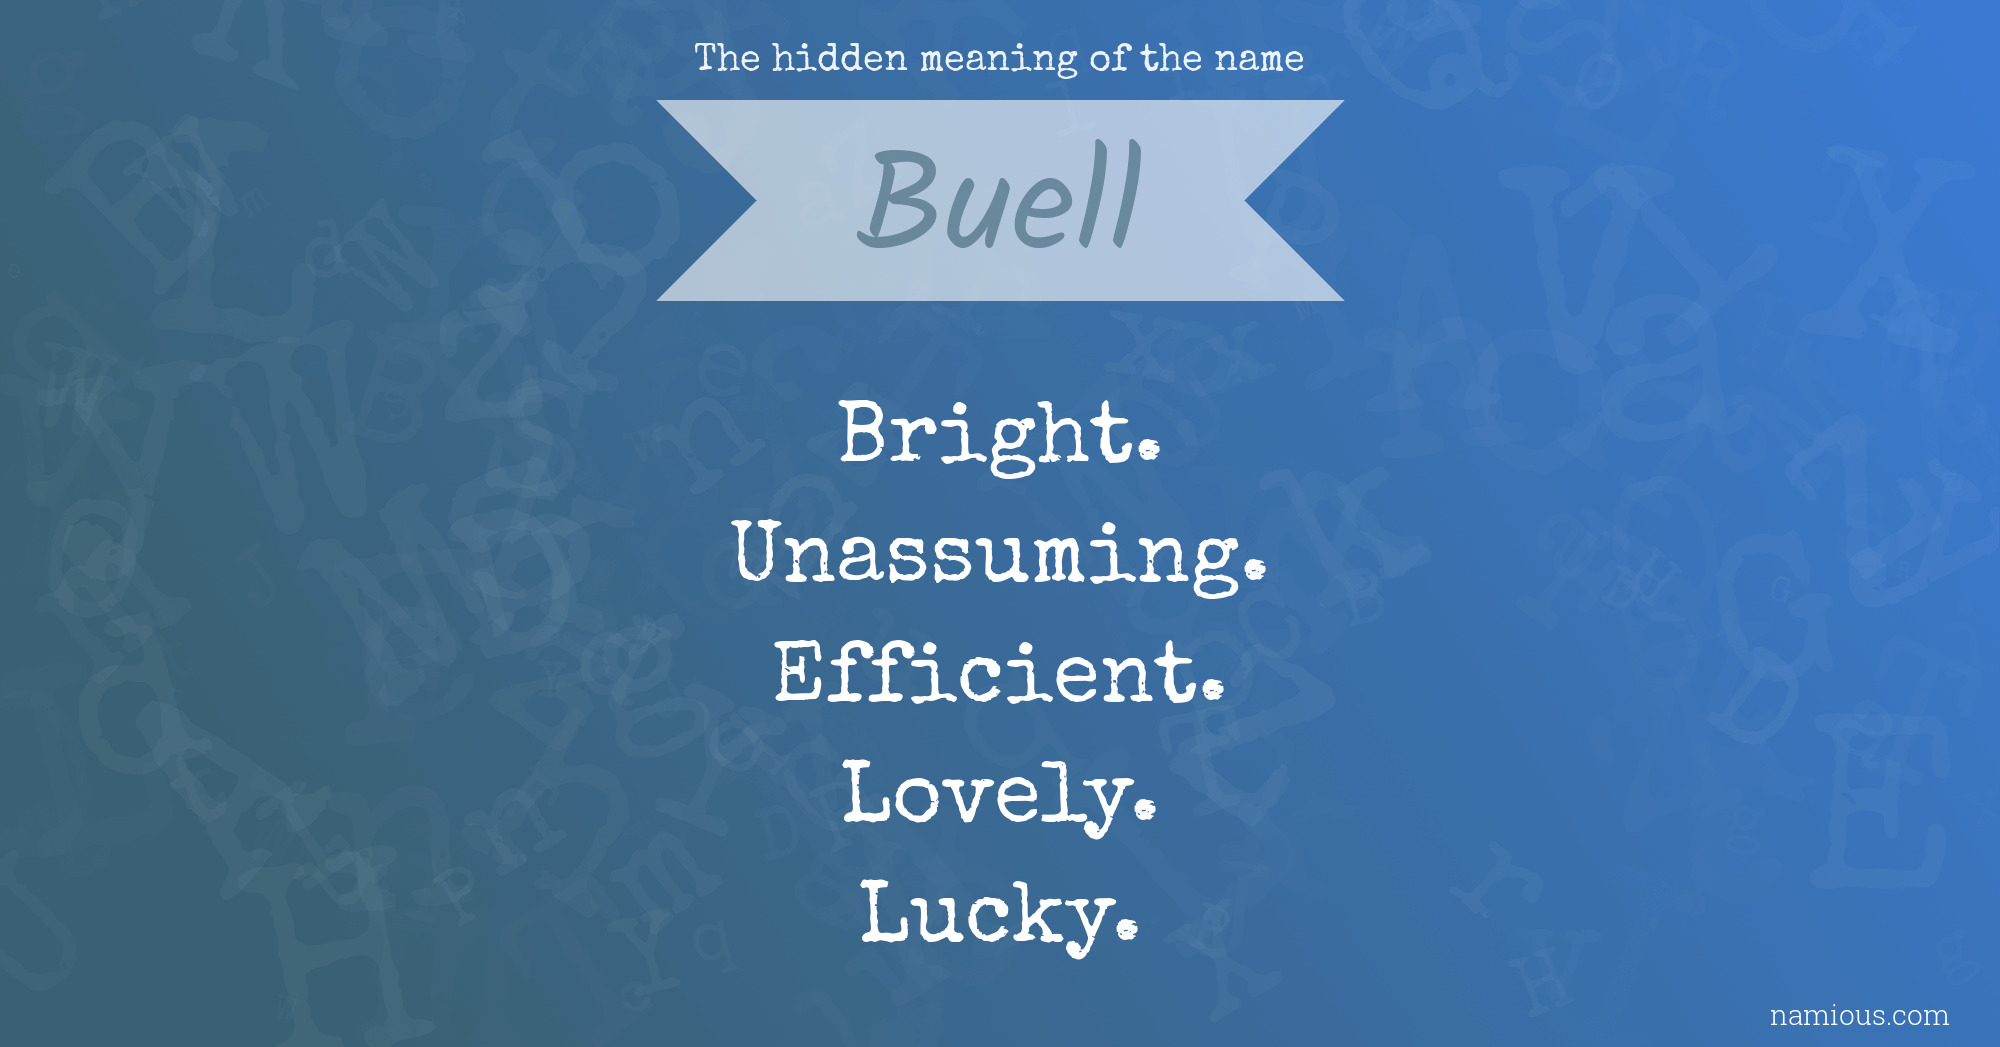 The hidden meaning of the name Buell